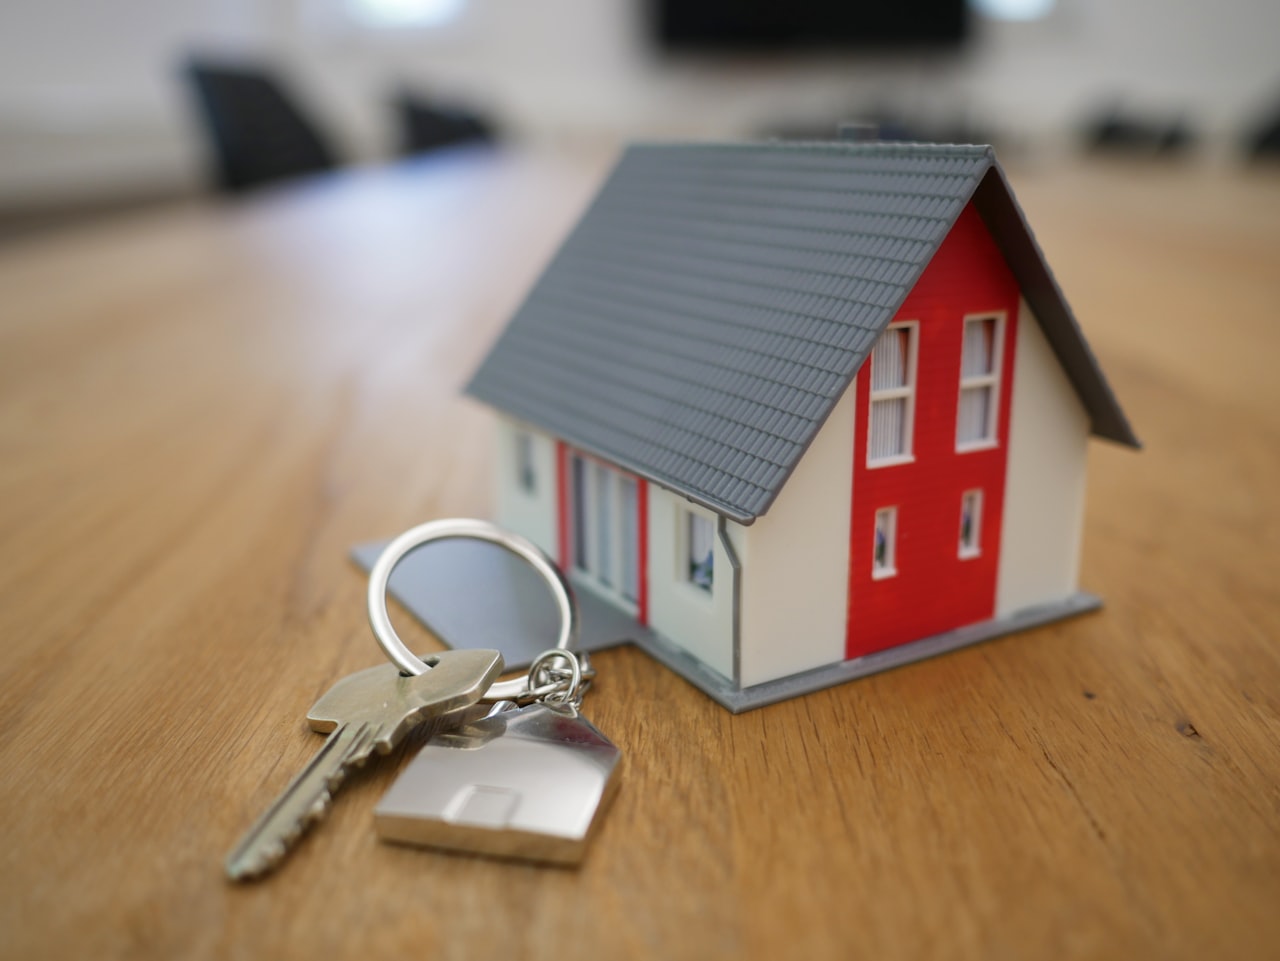 A miniature model house with a red door and a gray roof, sitting on a wooden table next to a set of keys